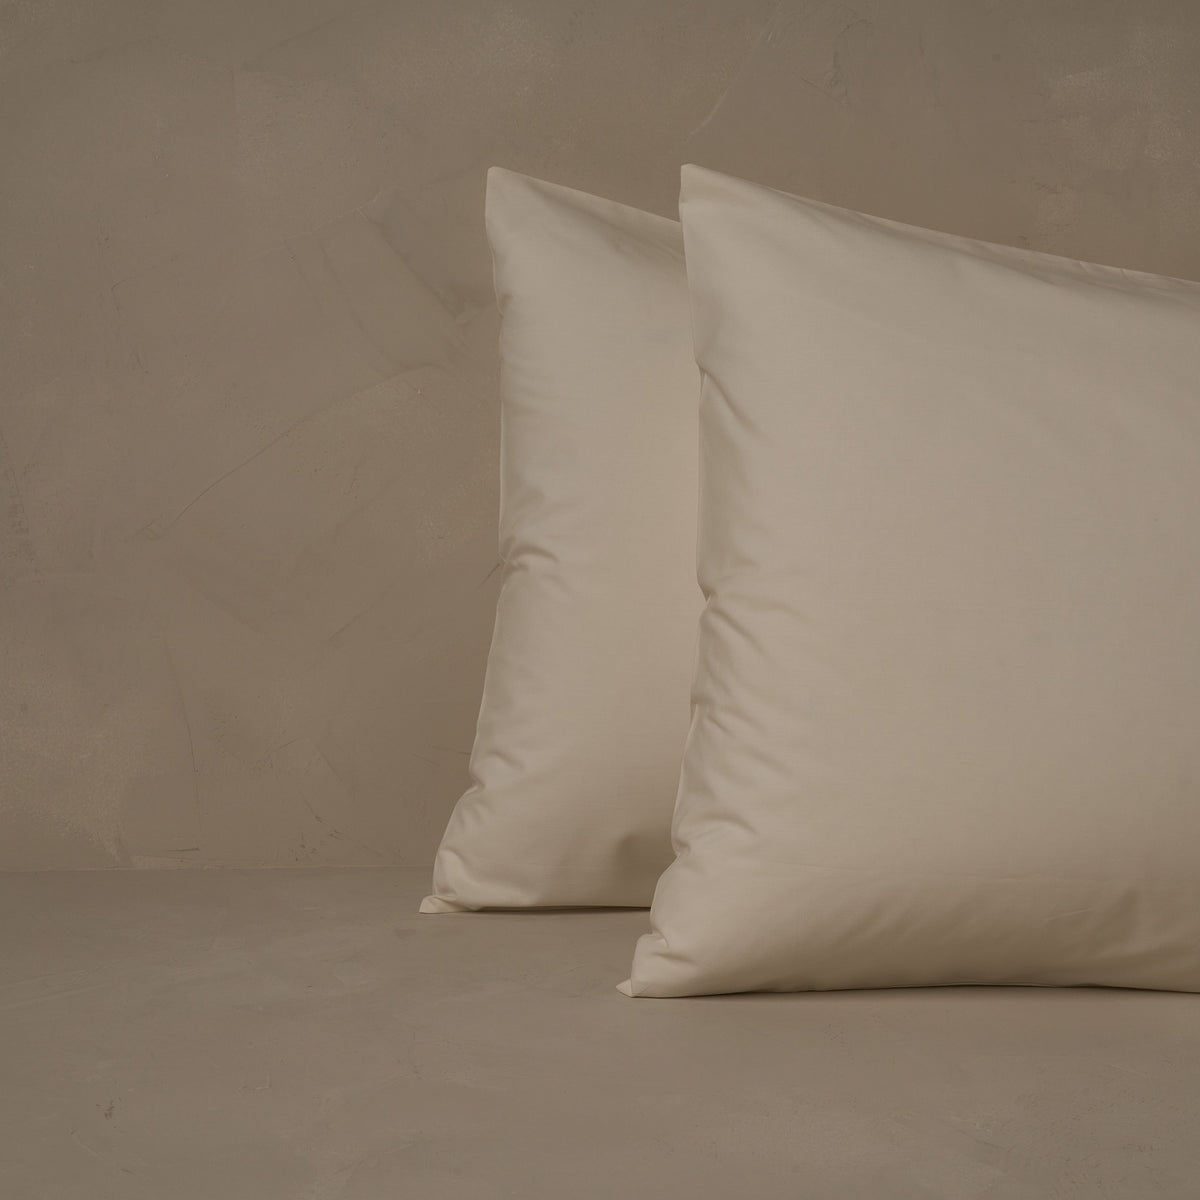 An image of two pillows stacked one in front of the other. The pillow cases are made of LETTO's cool and crisp Classic Cotton Percale in color ivory. data-image-id=